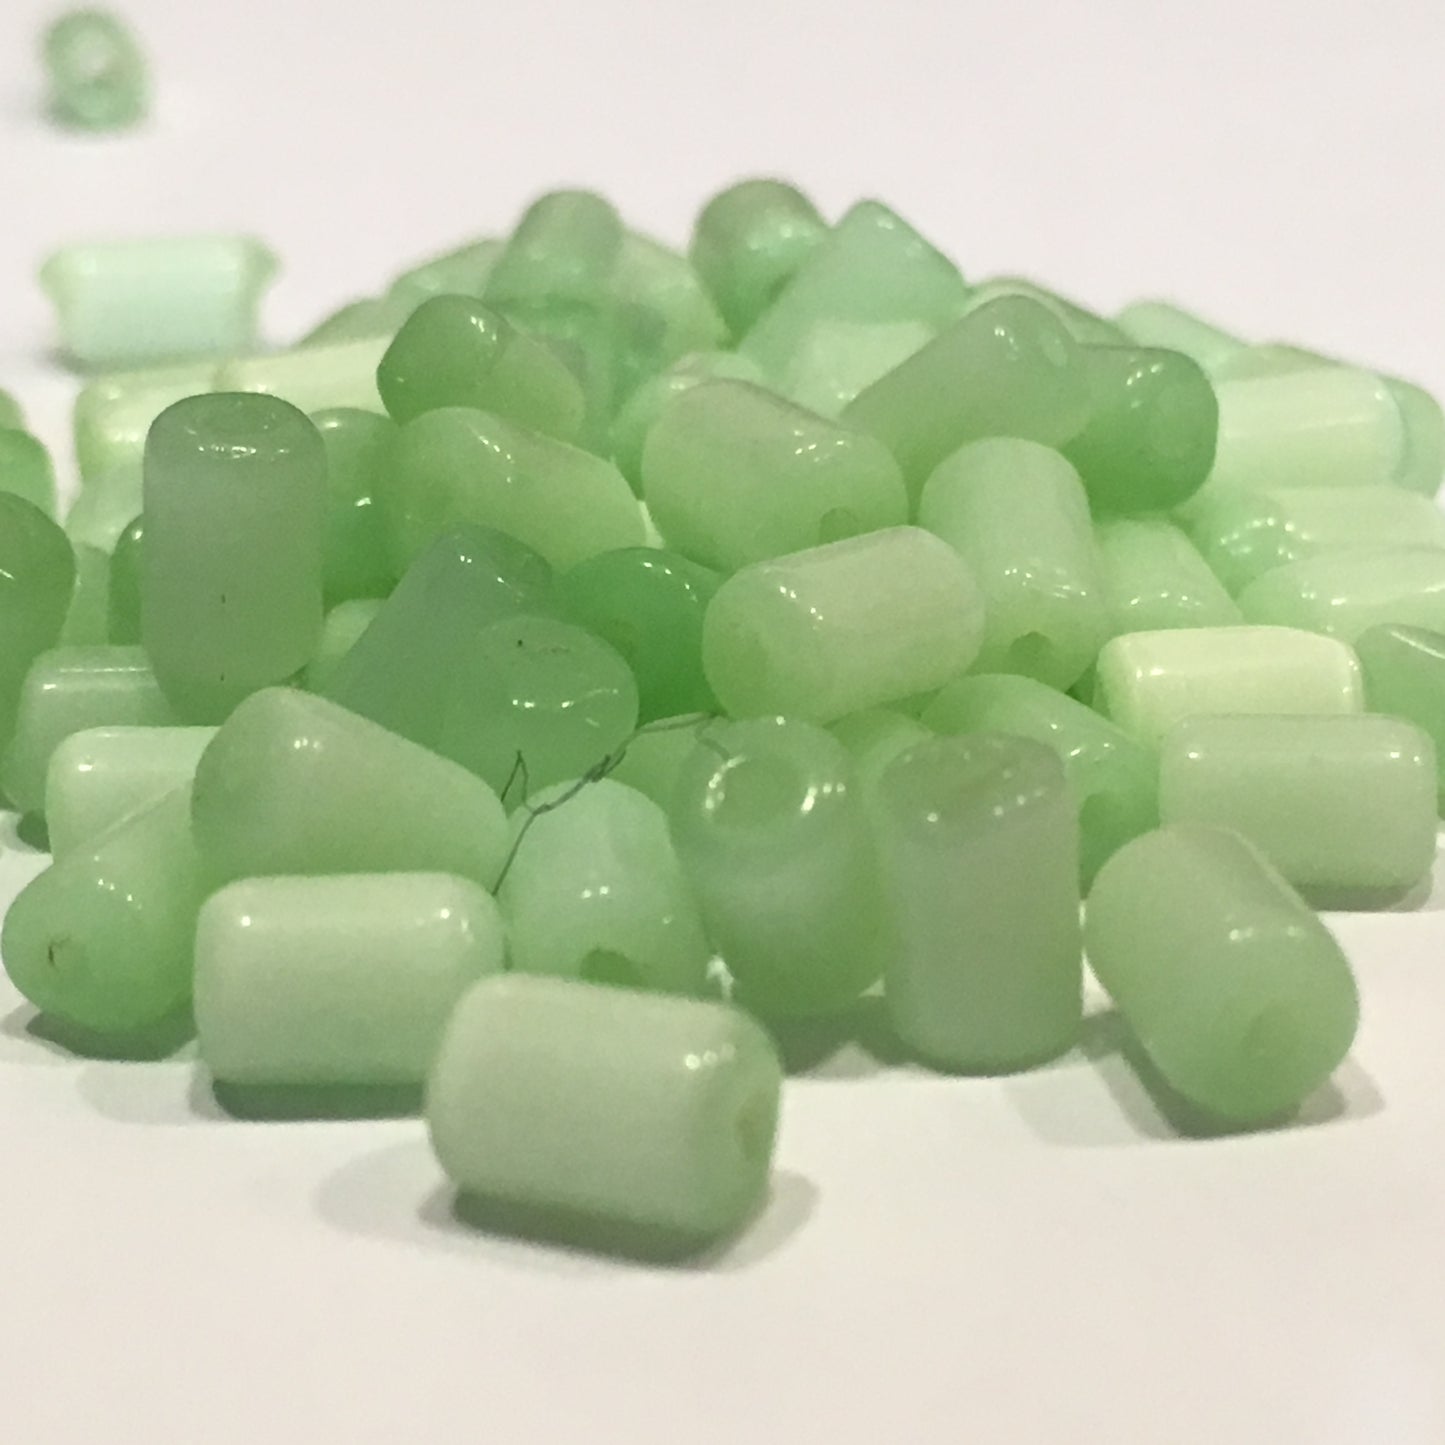 Light Green Painted Glass Tube Beads, Average Size 8 x 5 mm, 85 Beads